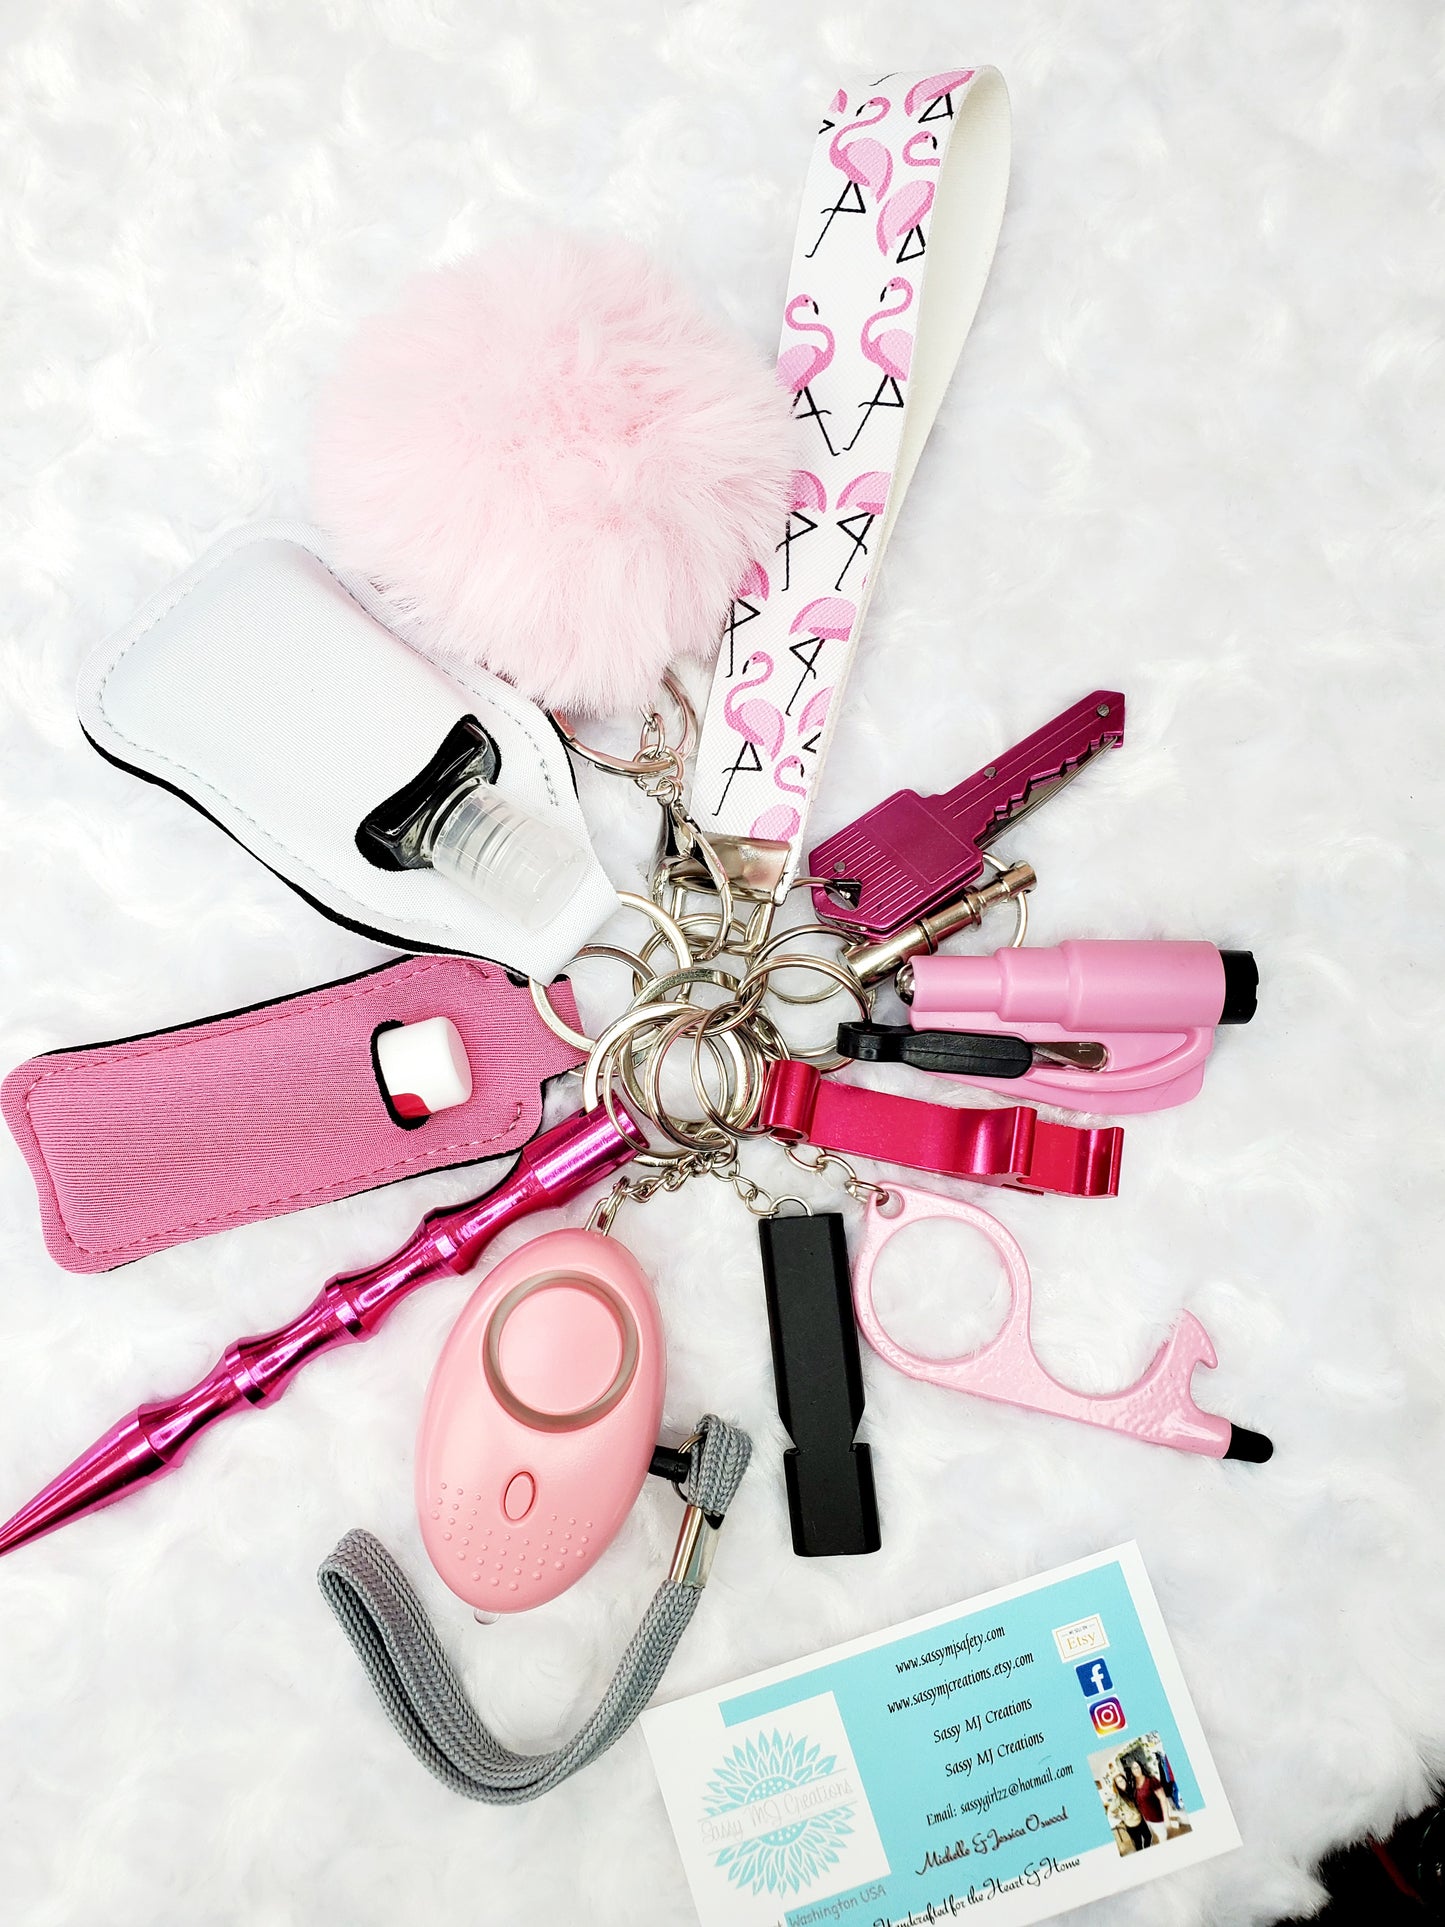 Pink & White Flamingo Faux Leather Strap Safety Keychain - Personal Safety Kit 14 pc